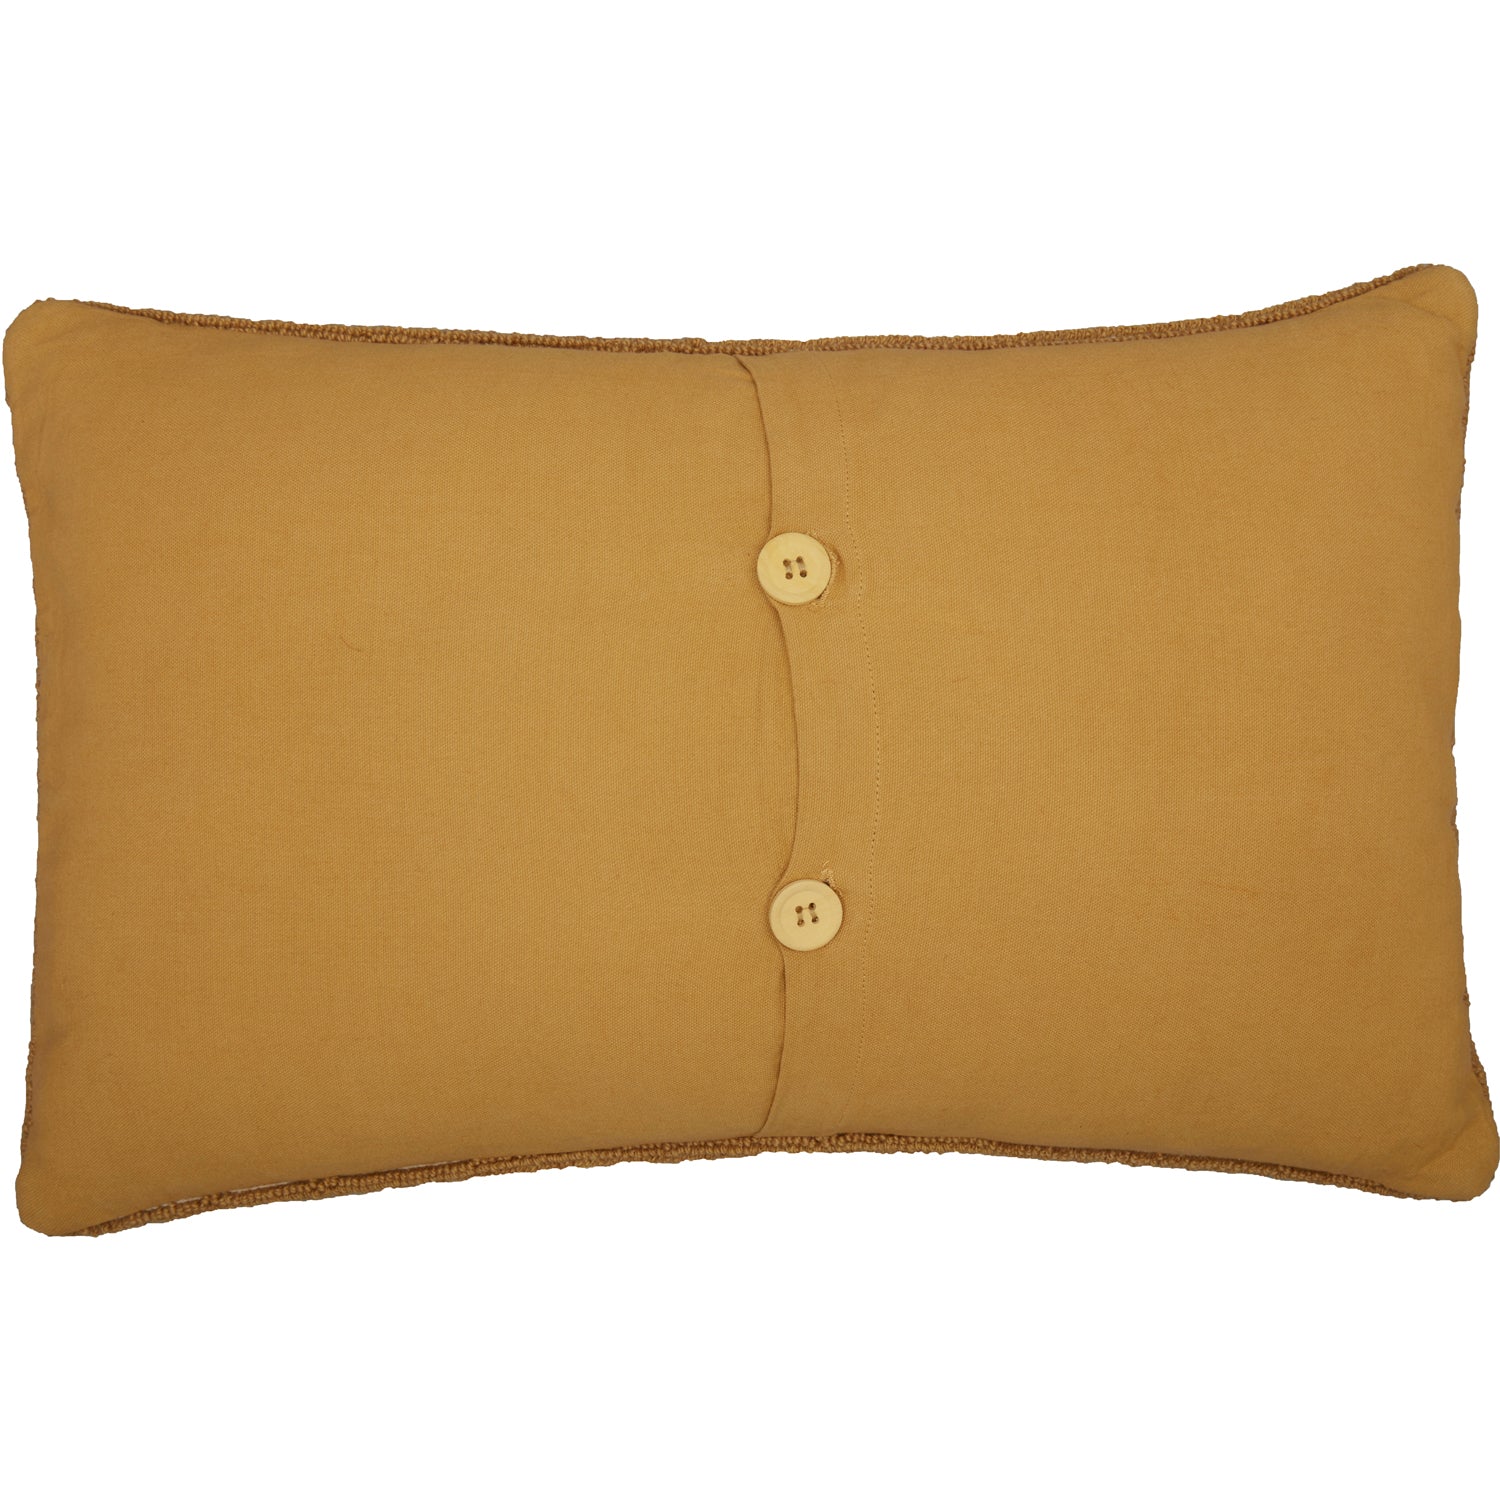 VHC Brands Primitive 14x22 Sheep Star Hooked Pillow Tan Heritage Bedroom  Decor 